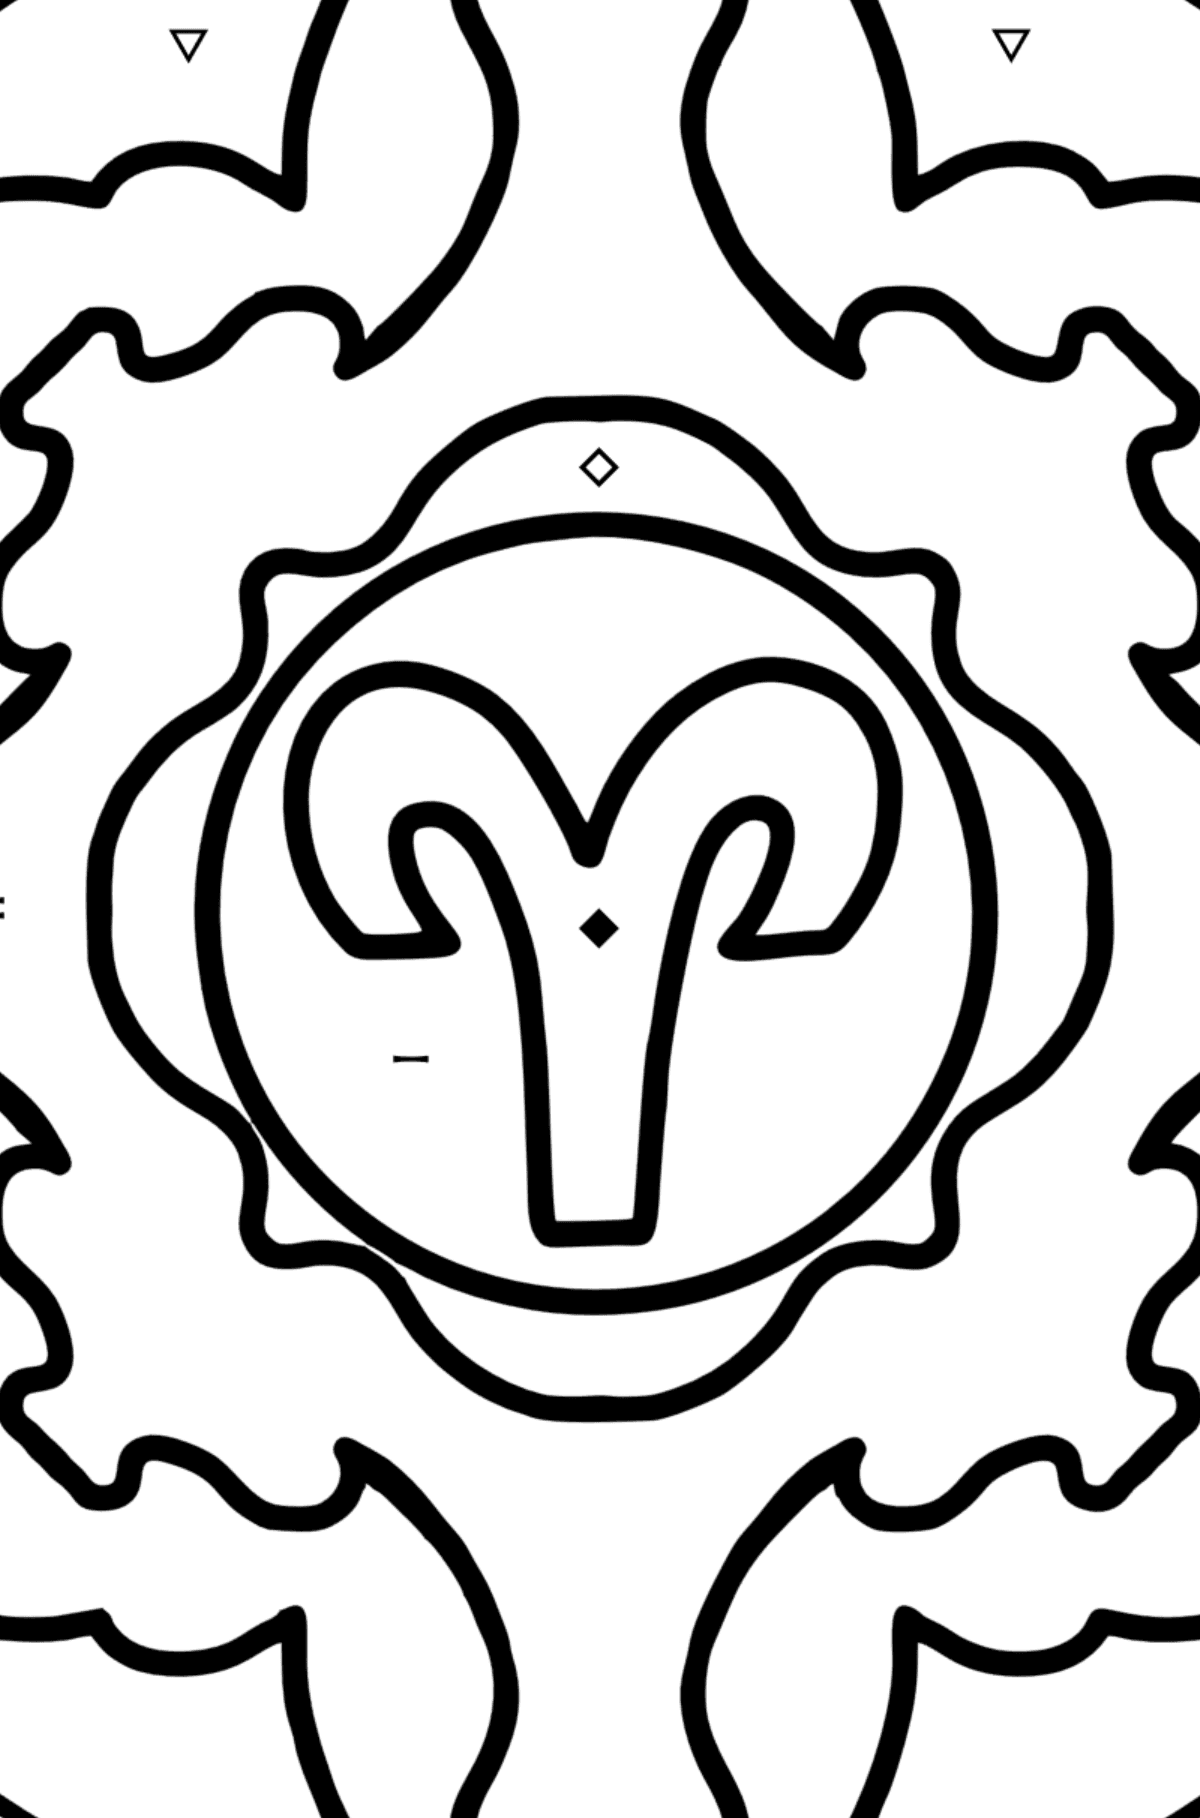 Coloring page - zodiac sign Aries - Coloring by Symbols for Kids